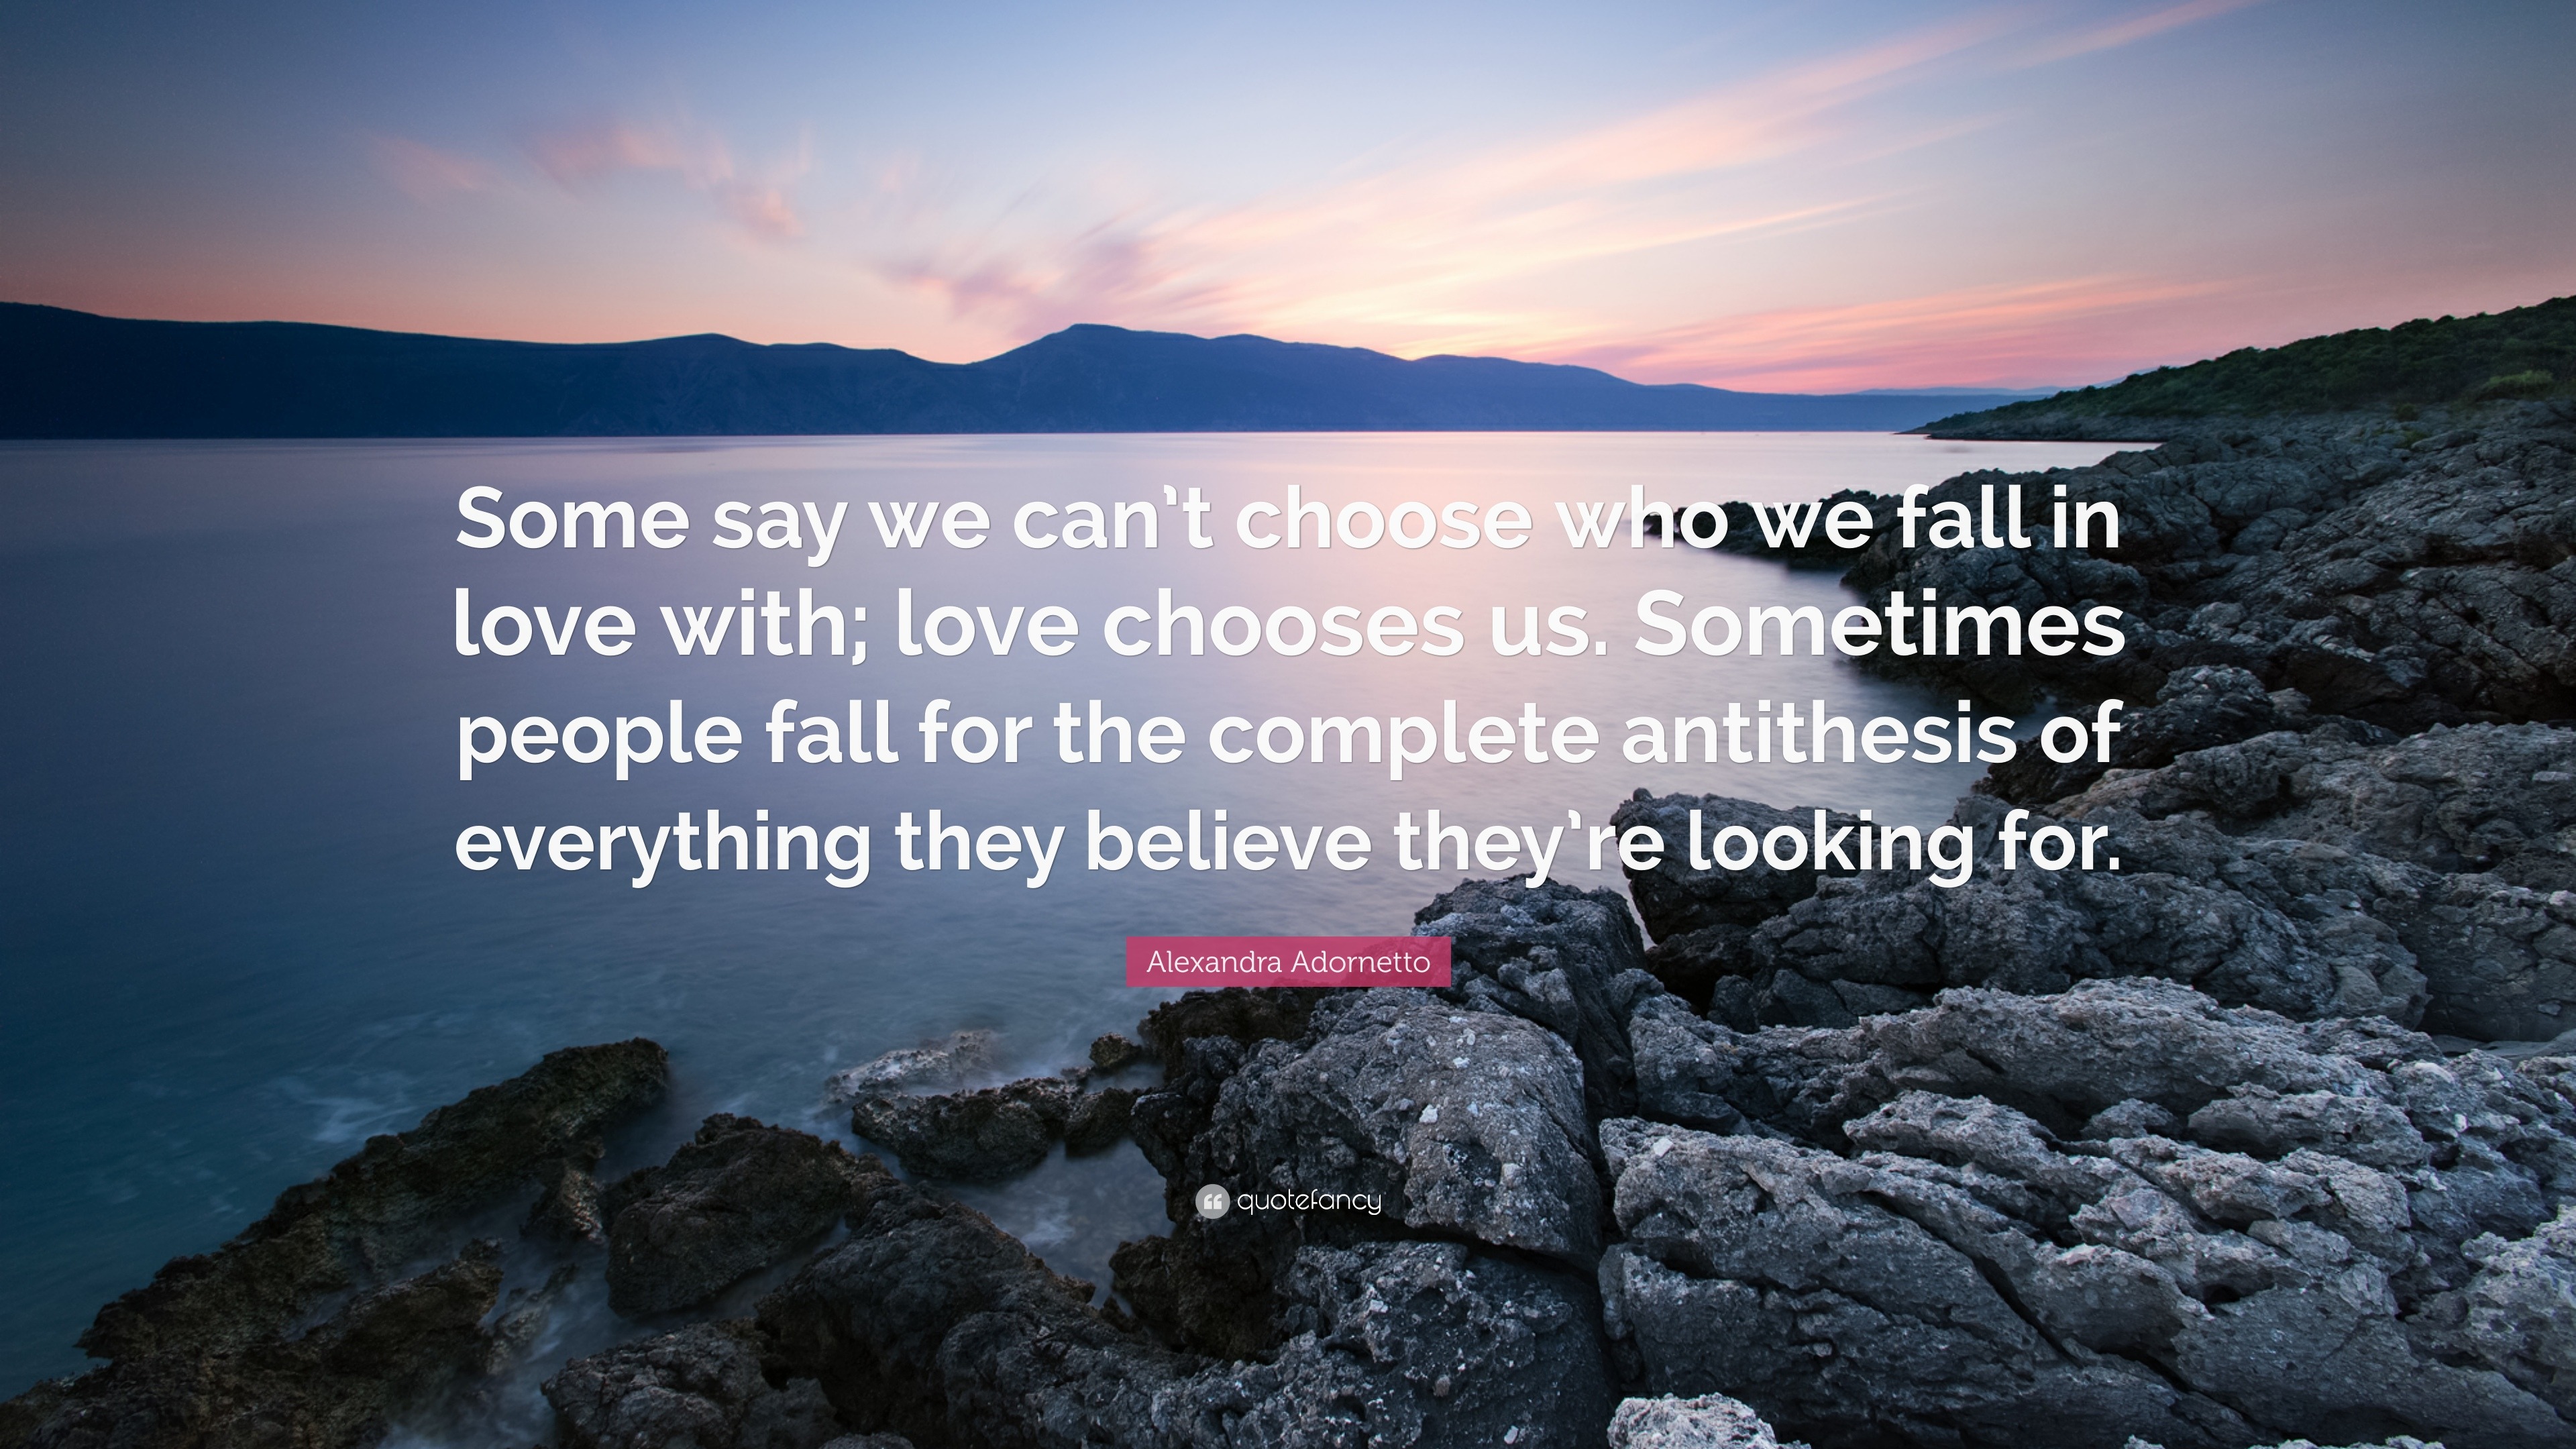 Alexandra Adornetto Quote “Some say we can t choose who we fall in